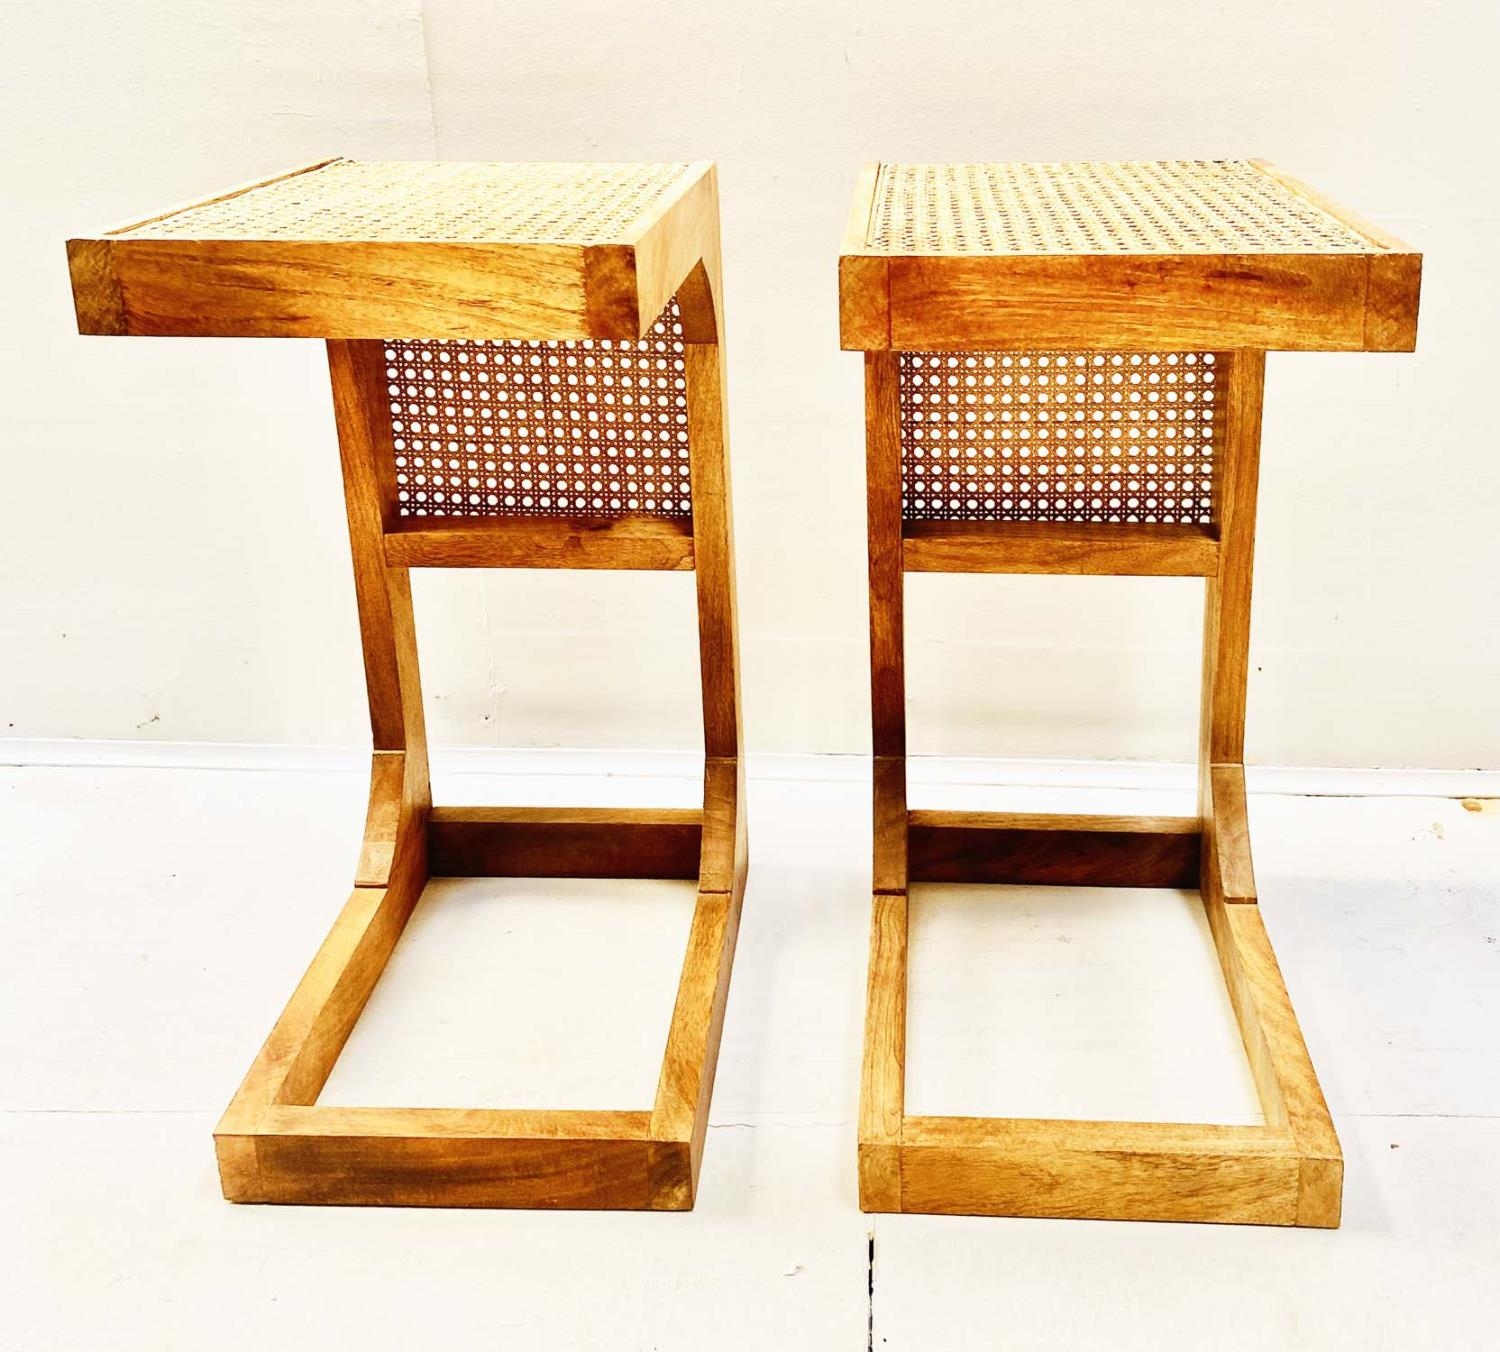 SIDE TABLES, a pair, 1970's Danish style, in wood and rattan, 60cm H x 30cm x 40cm. (2) - Image 3 of 5